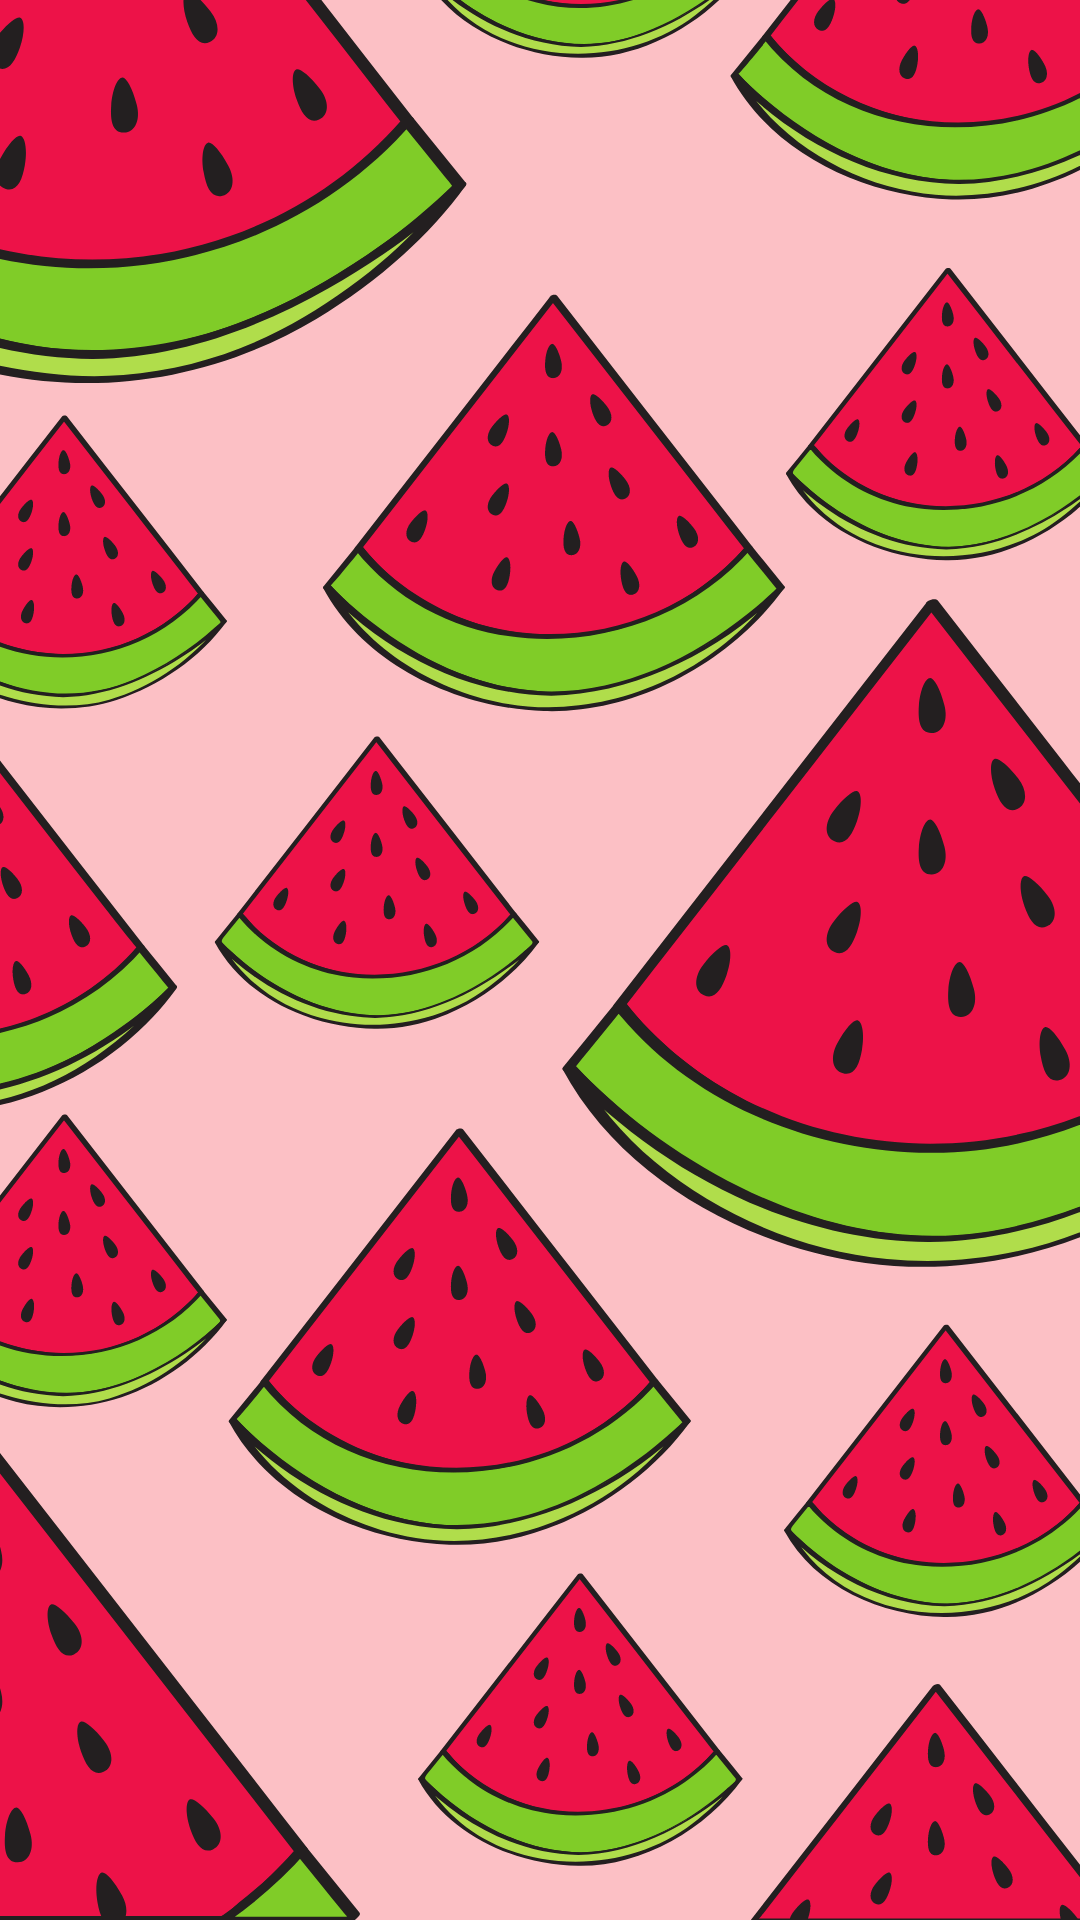 A pattern of watermelon slices on a pink background - Lemon, watermelon